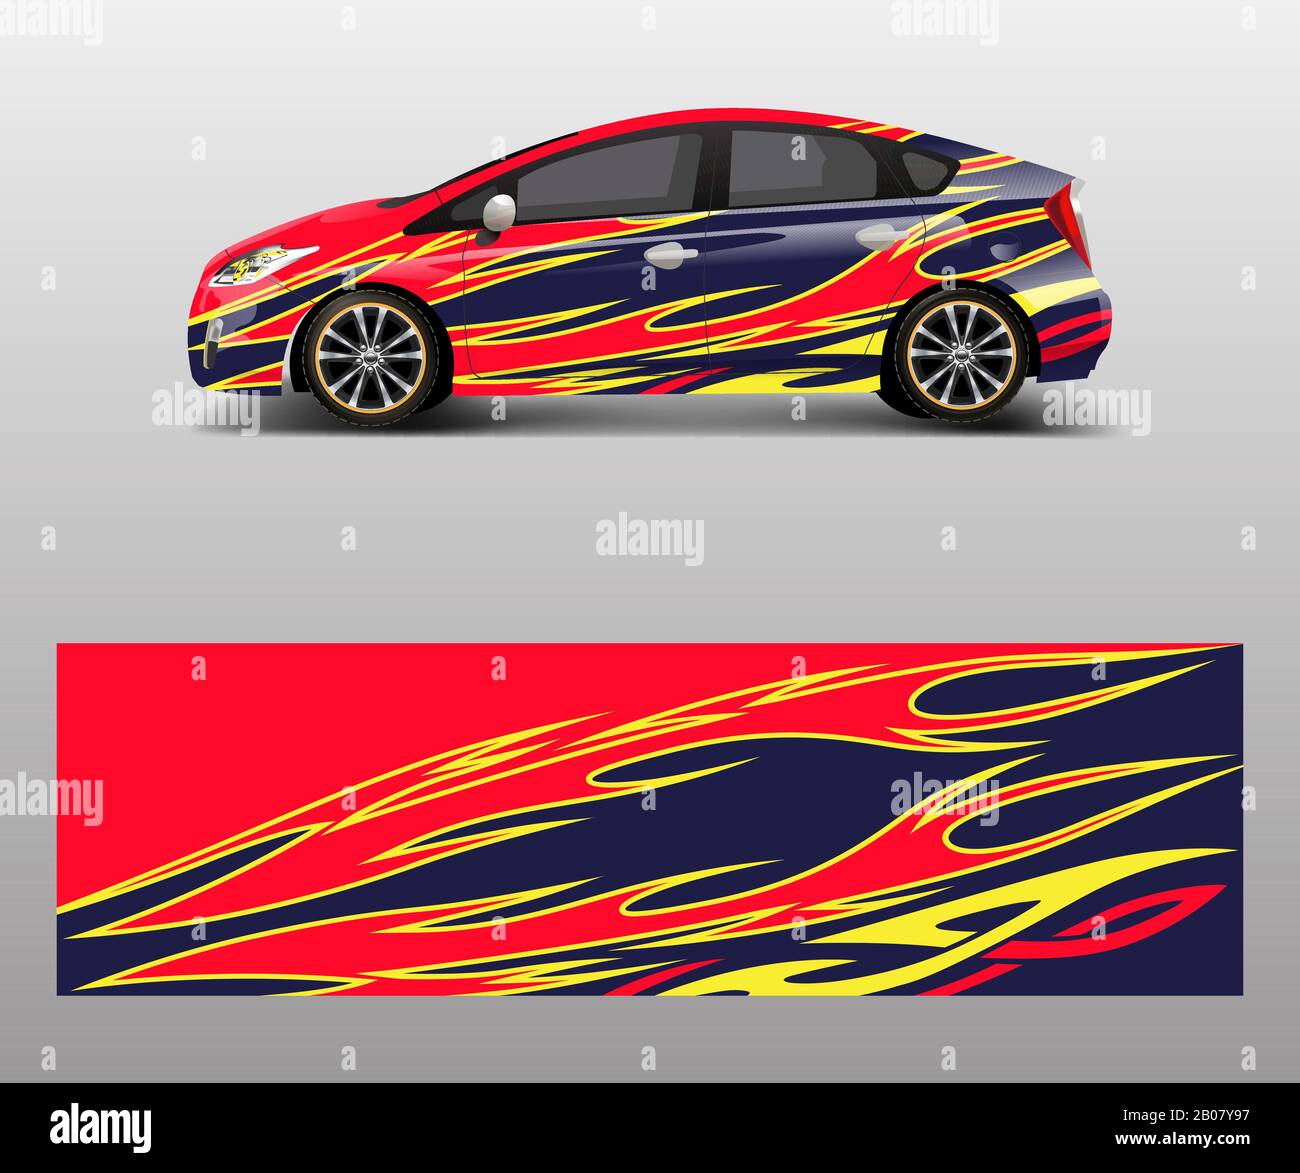 Car Wrap Decal Design Vector Graphic Abstract Racing Designs For Vehicle Rally Race Adventure Template Design Vector Stock Vector Image Art Alamy,New Latest Indian Dress Designs